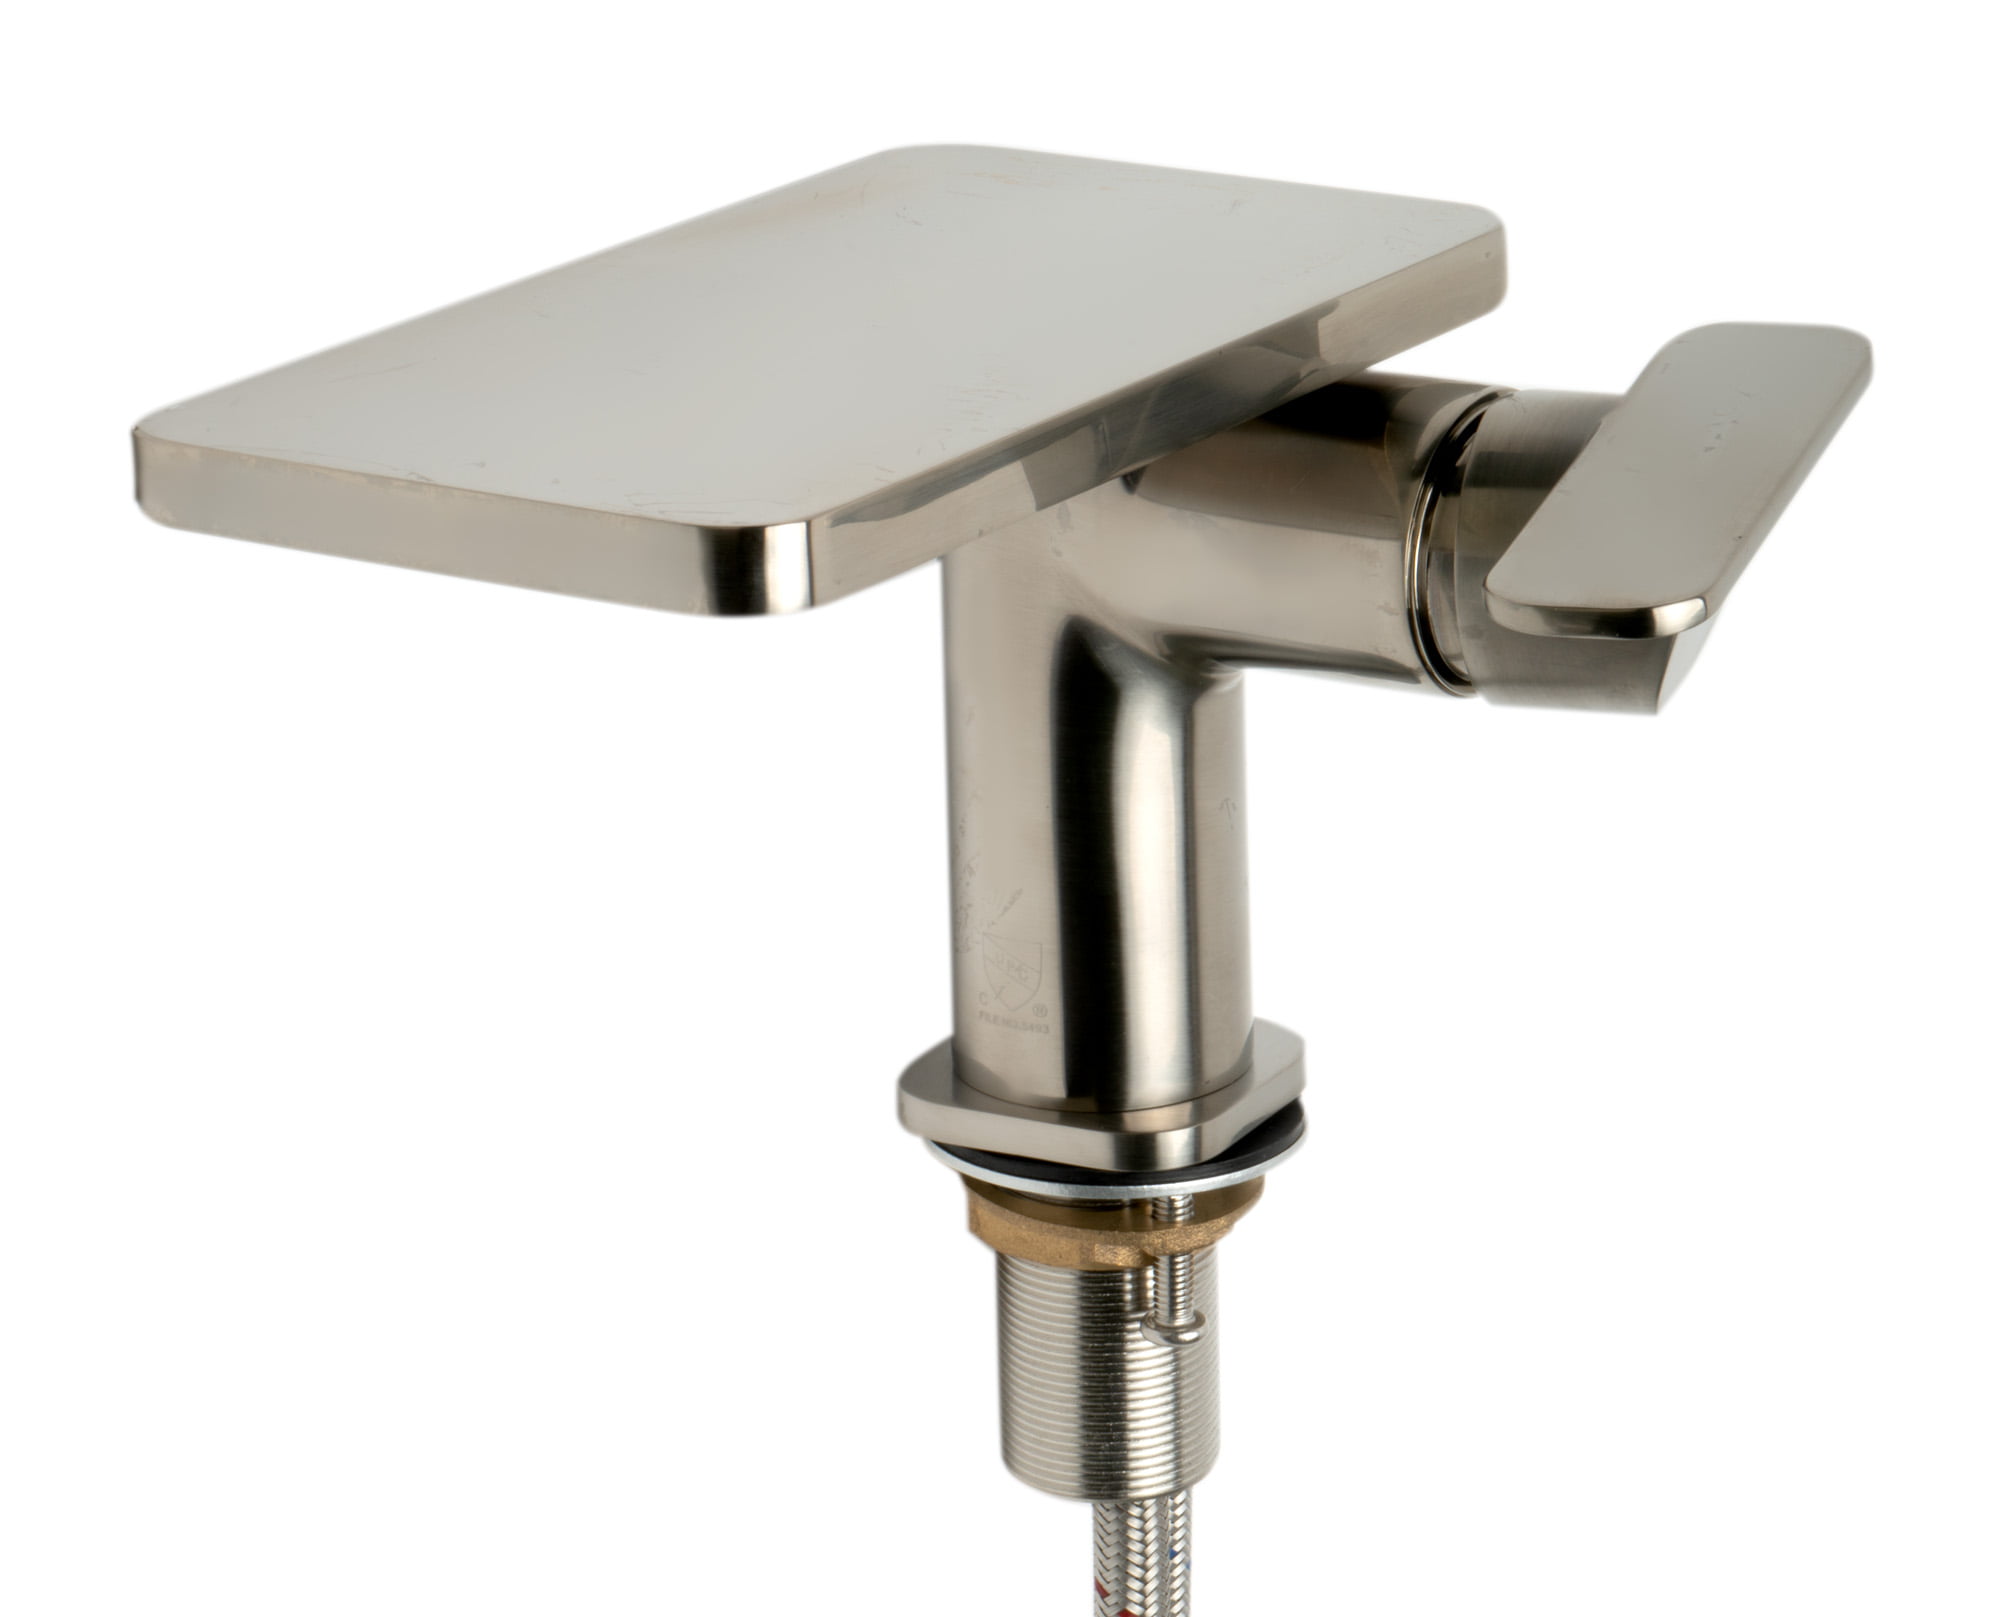 Ab1882-bn Single-lever Bathroom Faucet - Brushed Nickel